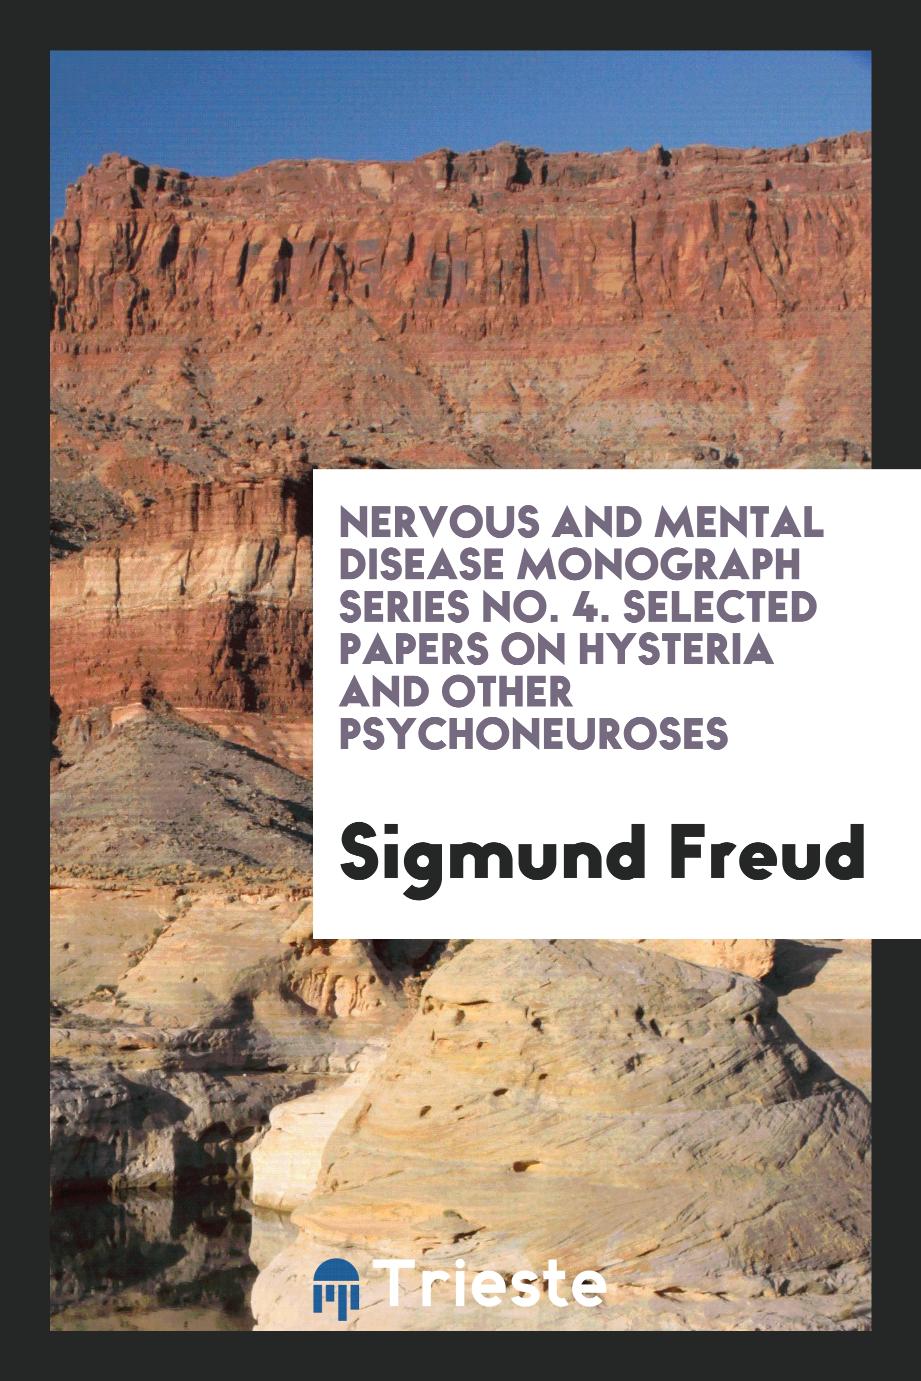 Nervous and mental disease monograph series No. 4. Selected papers on hysteria and other psychoneuroses